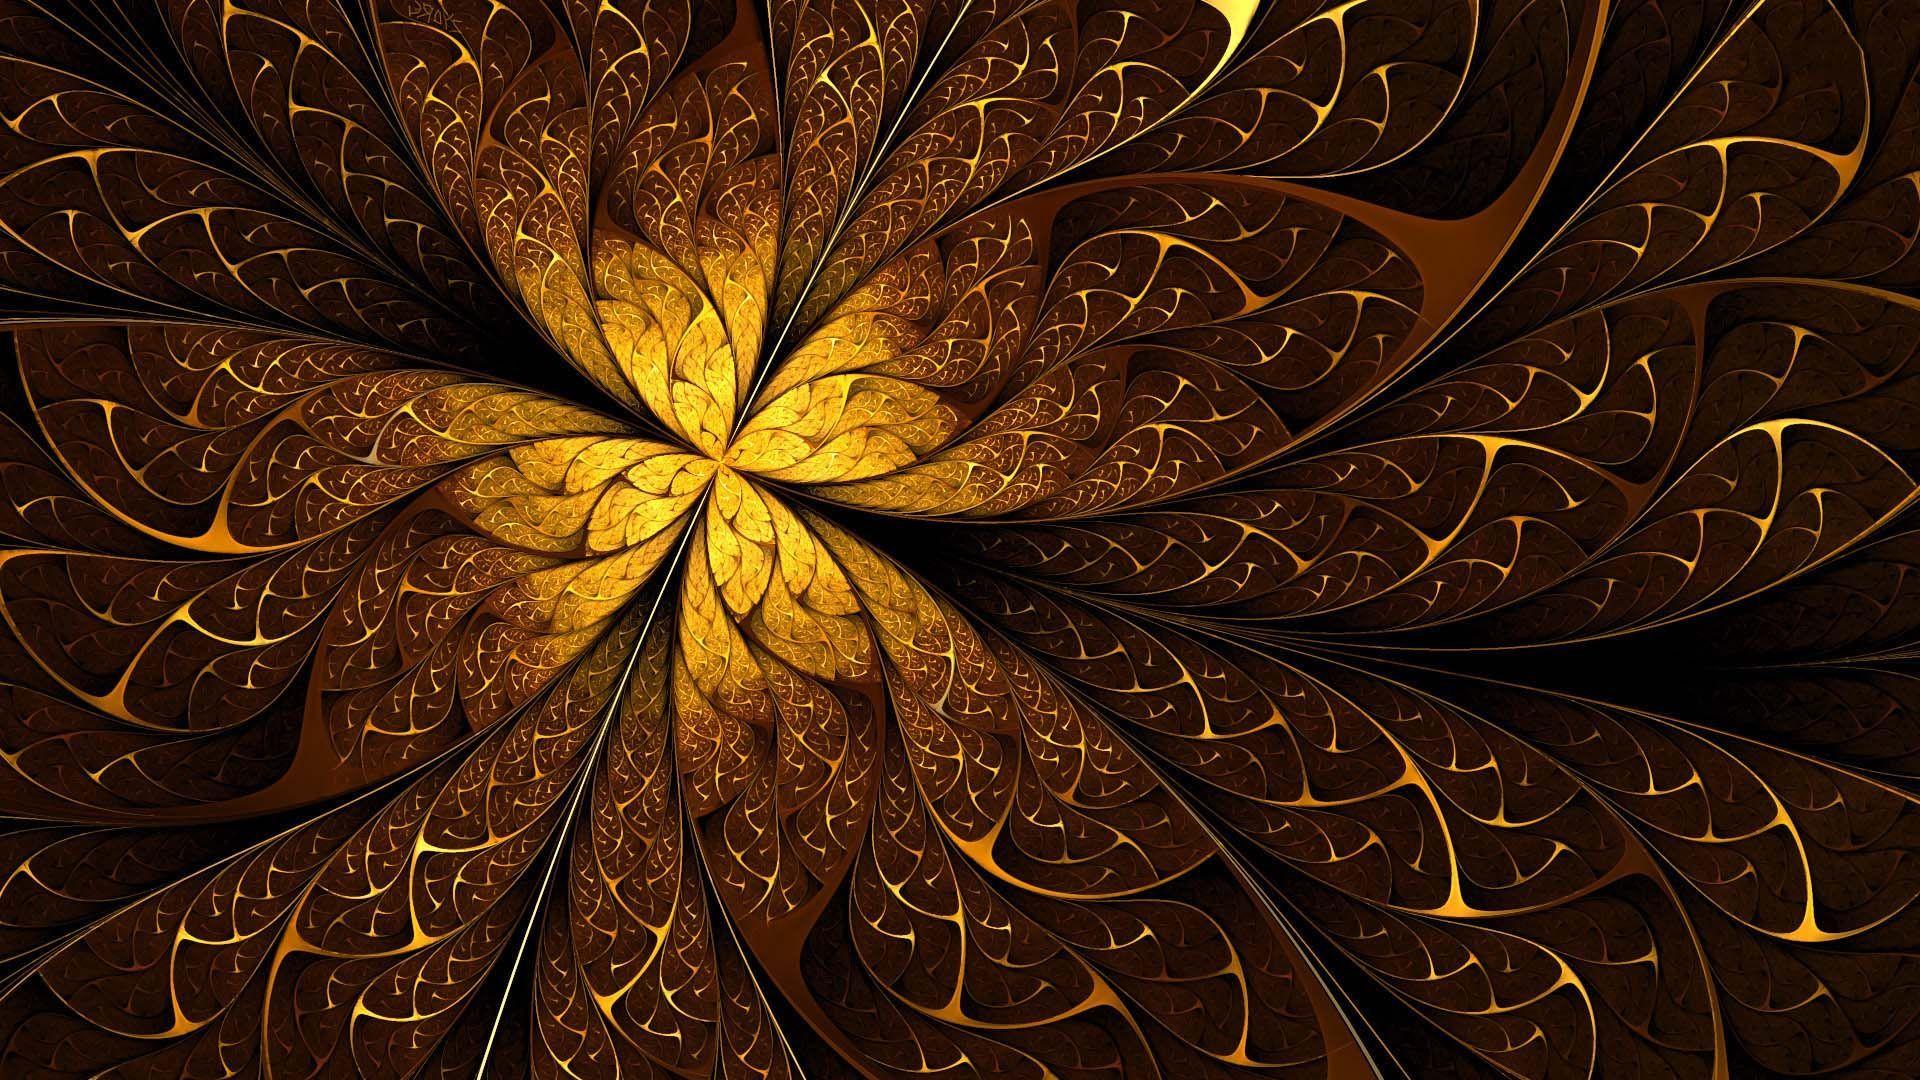 Golden Swirling Leaves HD. HD 3D and Abstract Wallpaper for Mobile